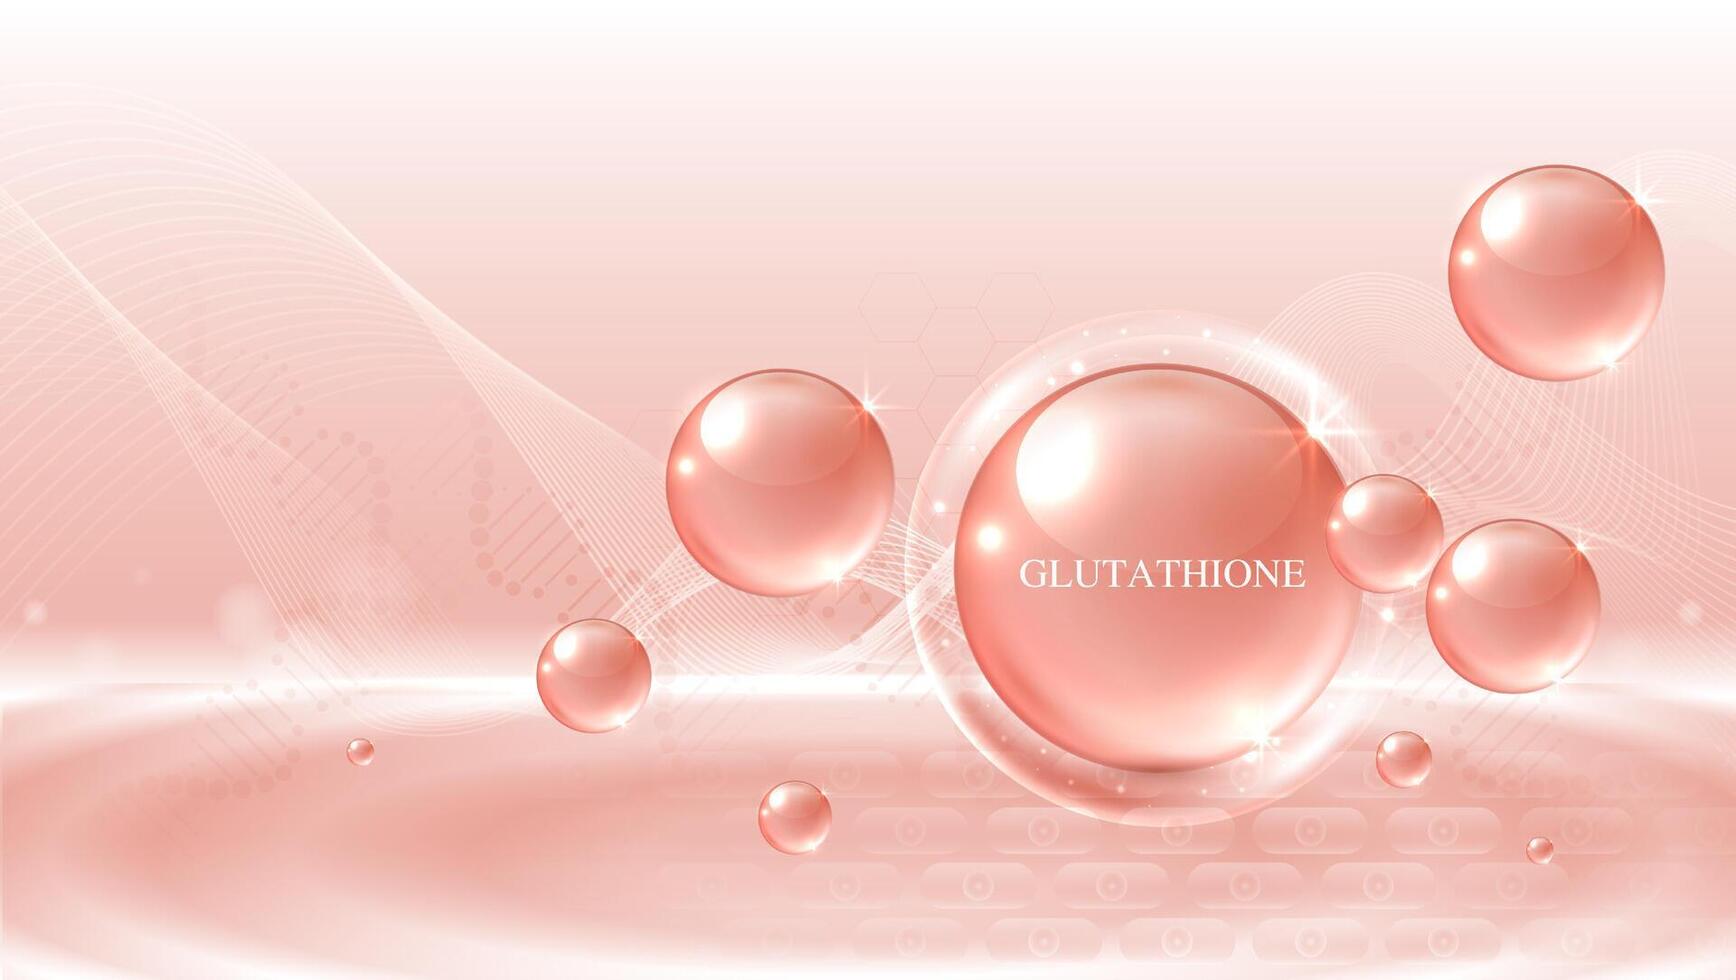 Glutathione serum drops over pink skin cells with cosmetic advertising. healthy life medical and dietary supplement. natural skin care cosmetic stimulate collagen. design. vector